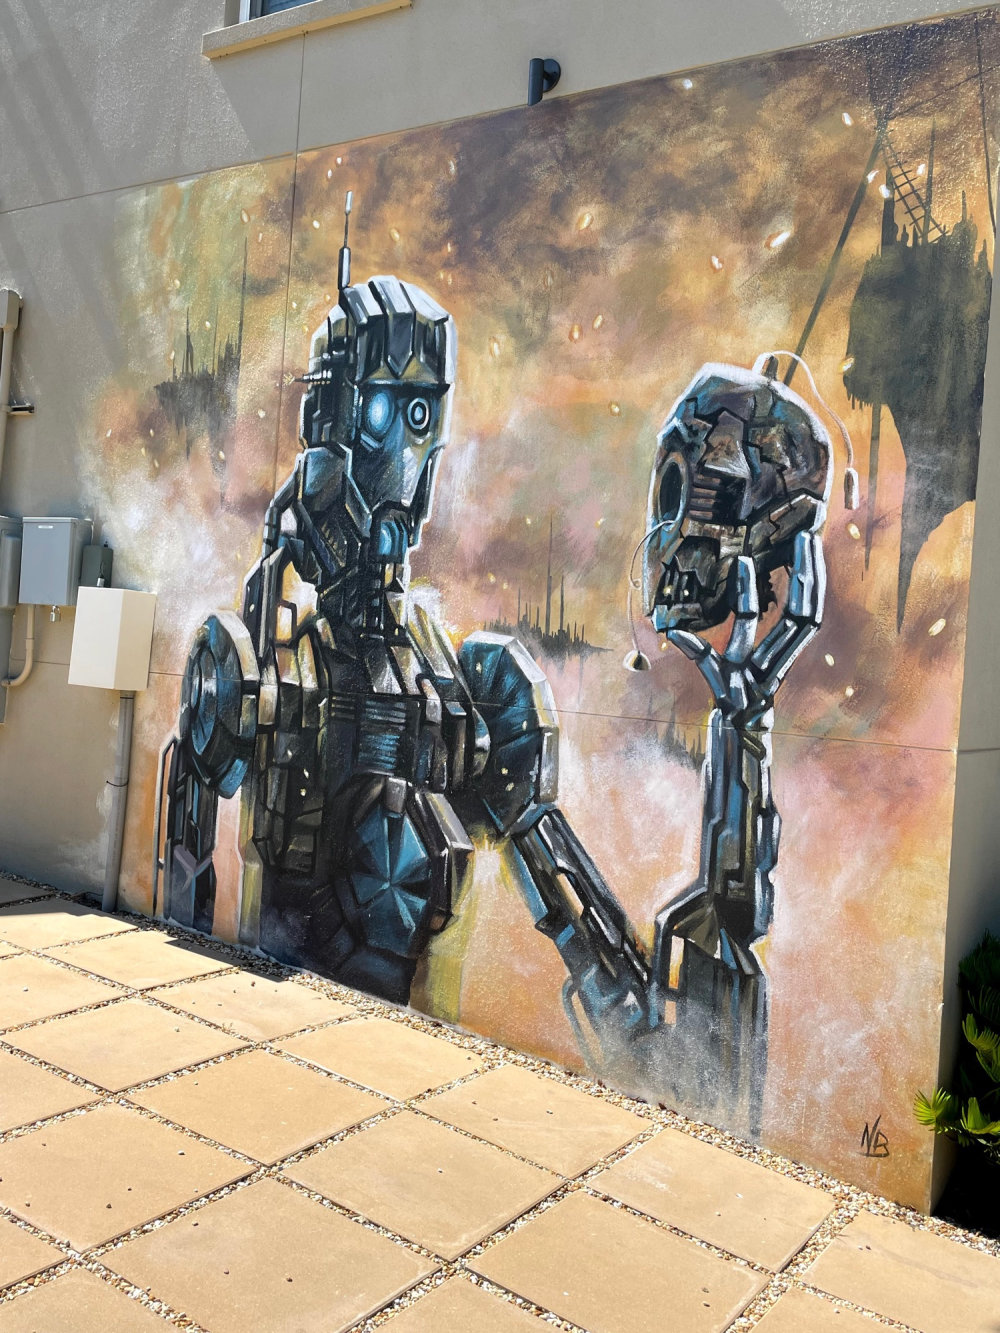 mural in Sarasota by artist unknown.